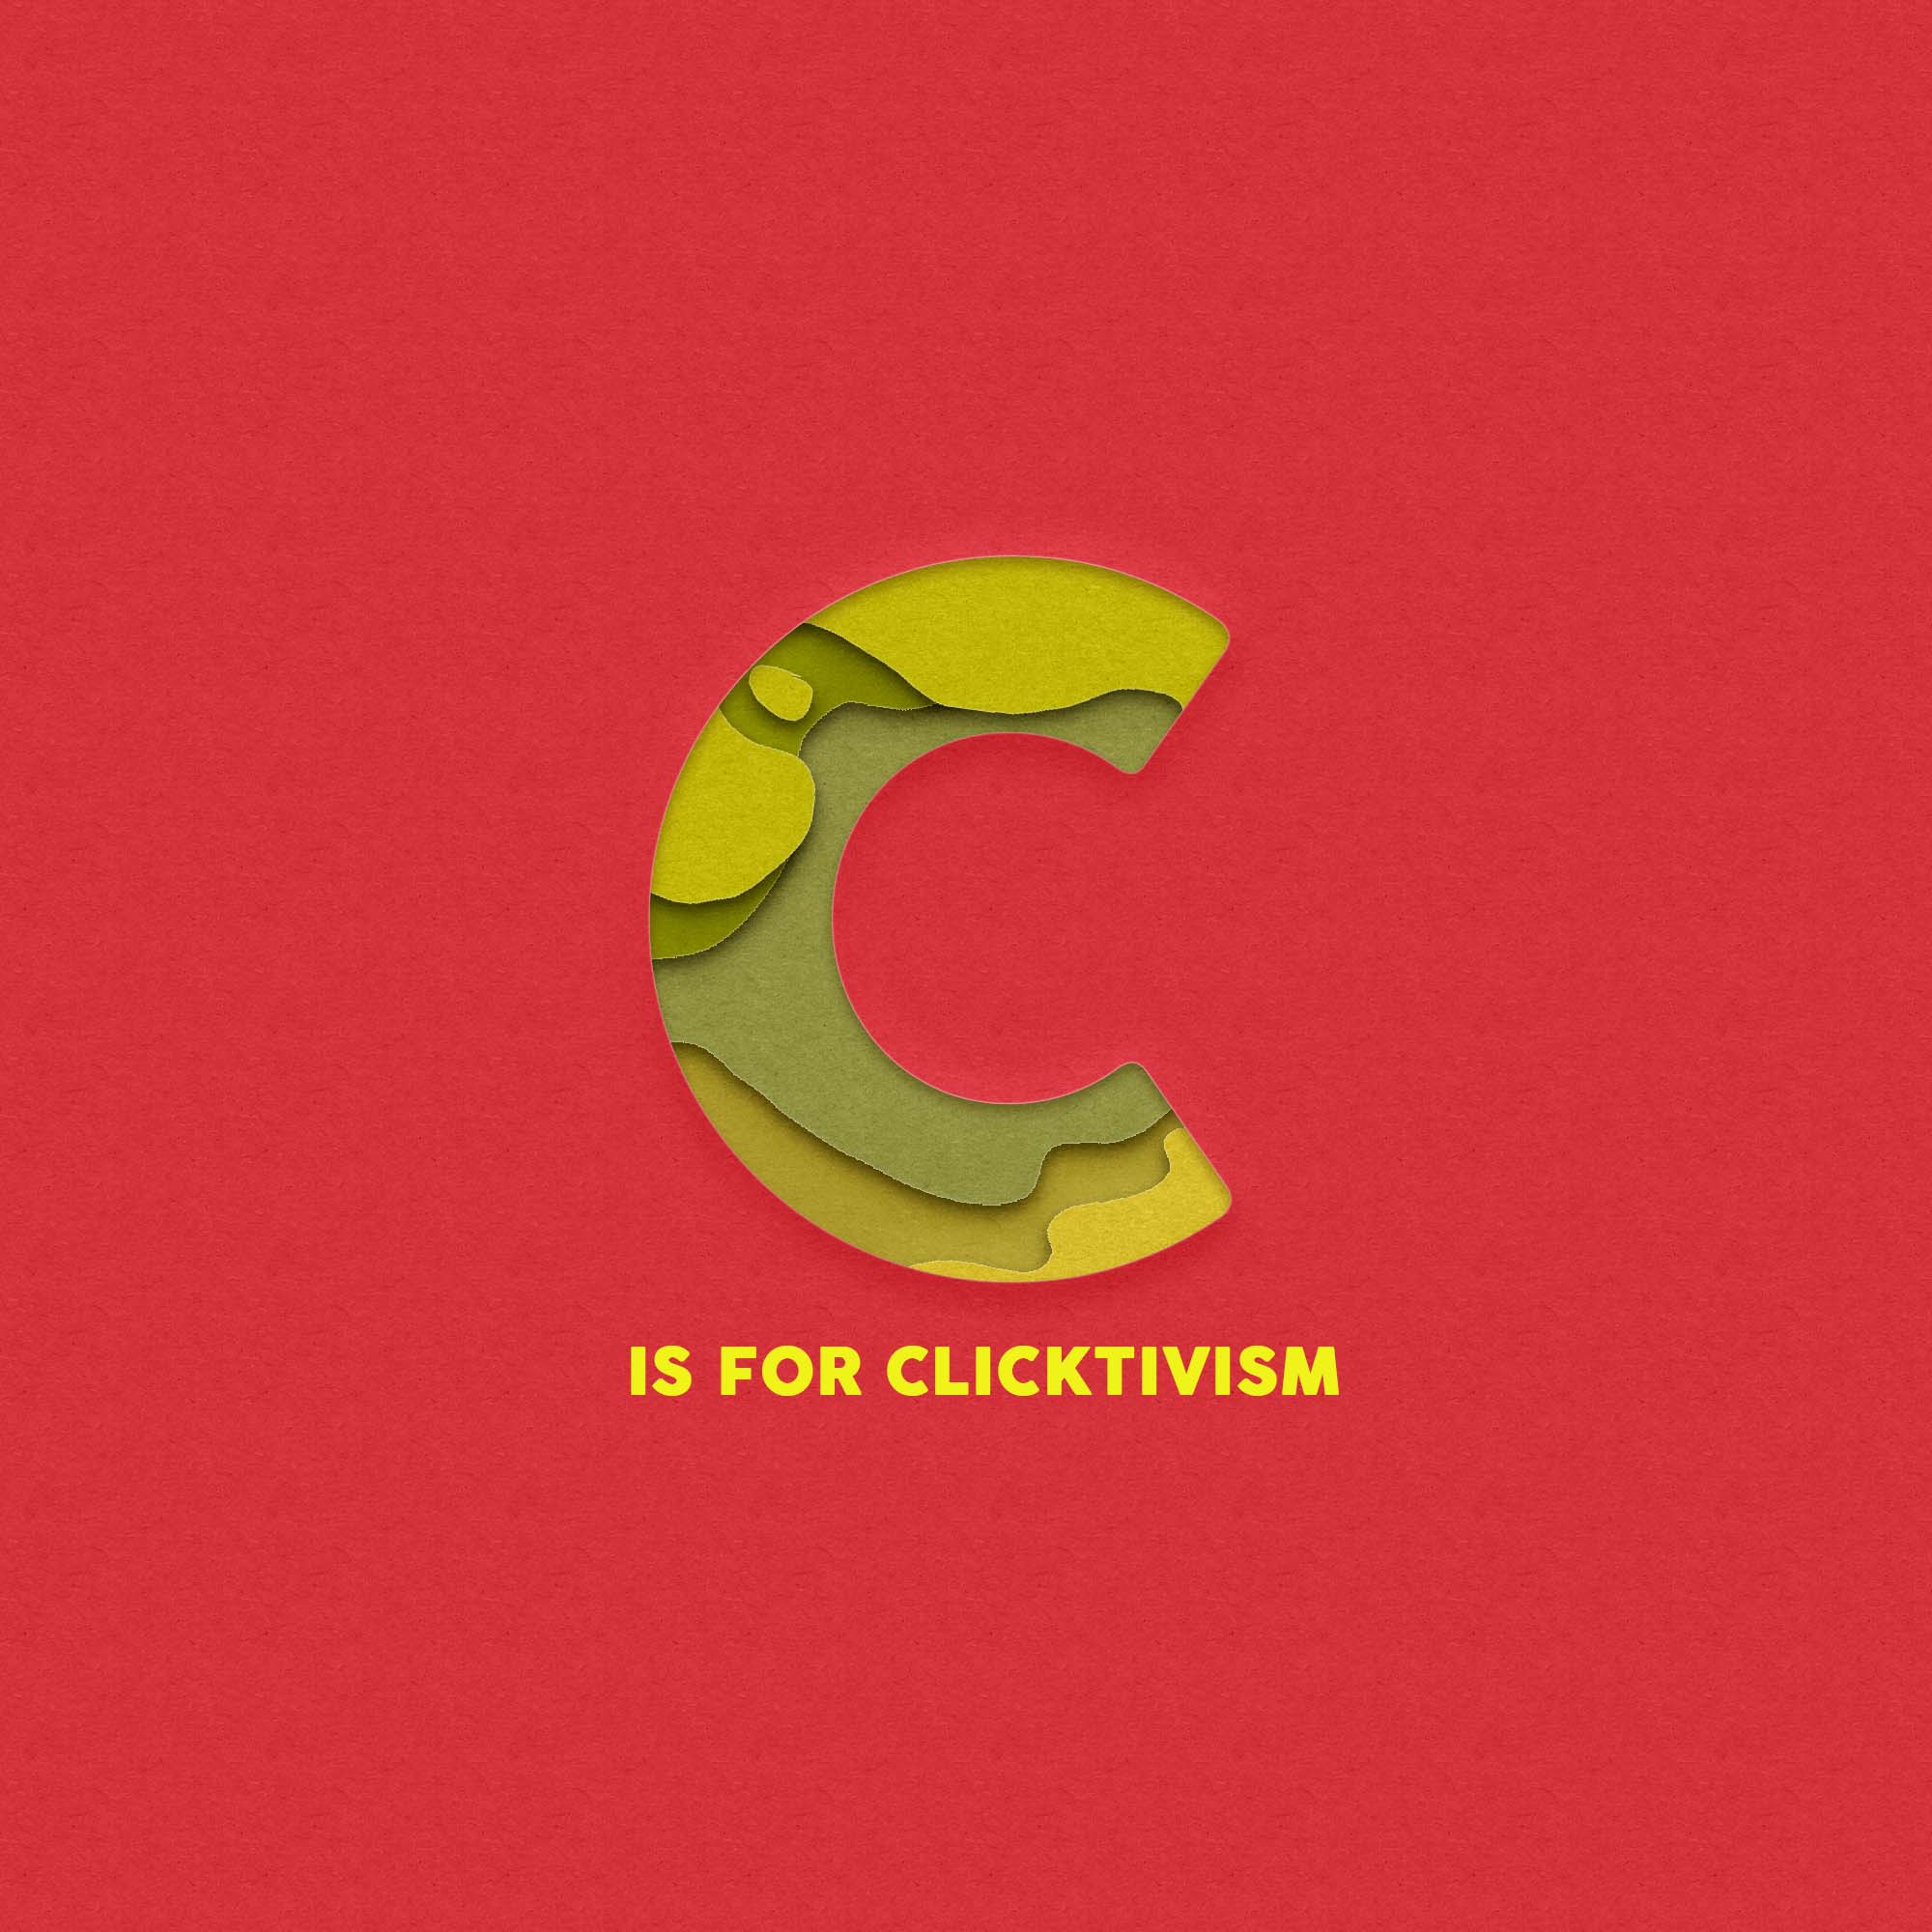 How to be a Clicktivist